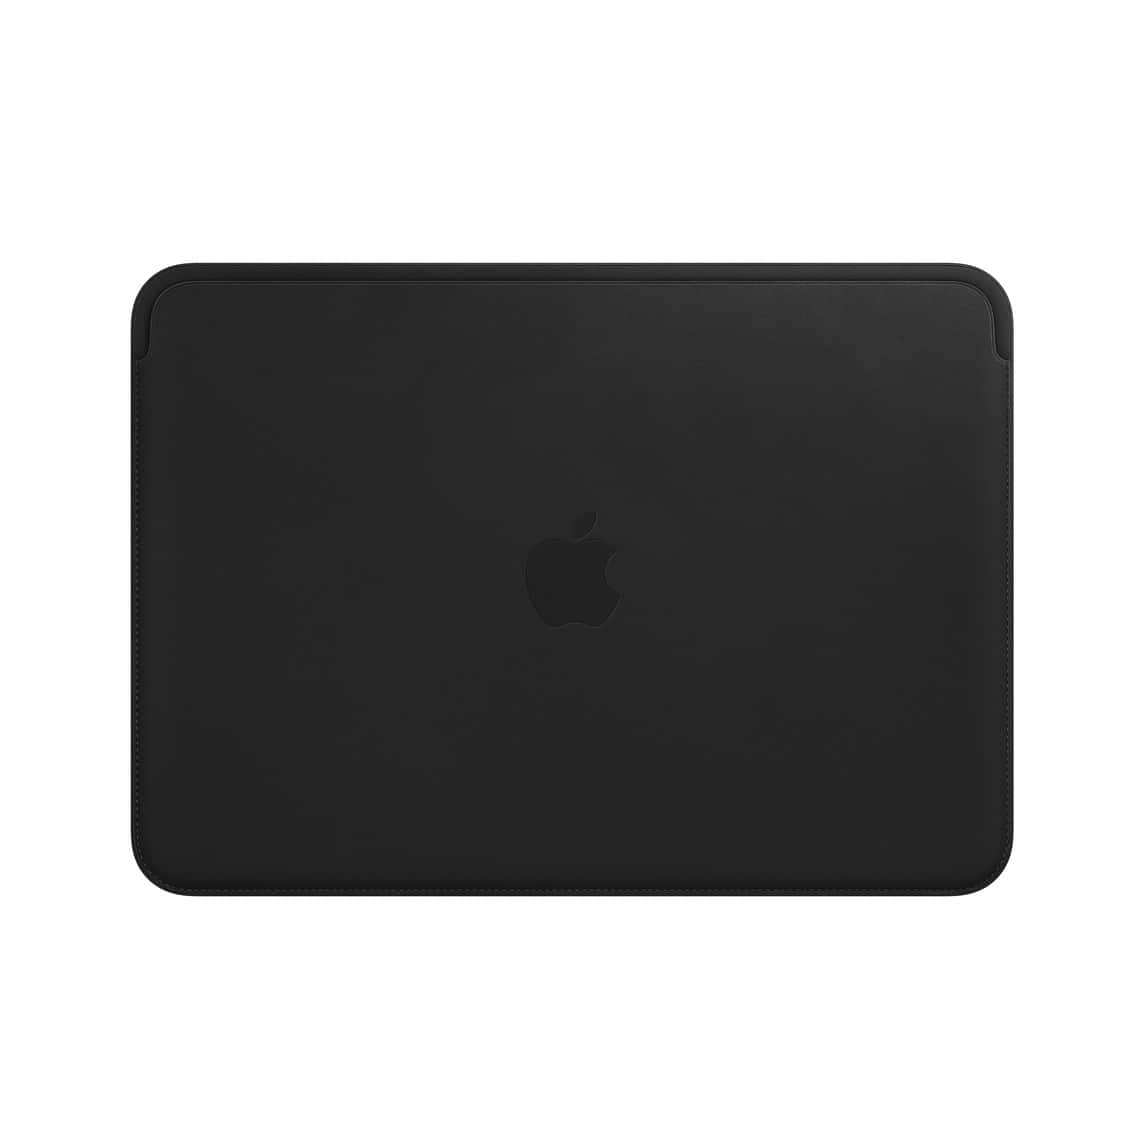 A Black Leather Case For An Apple Macbook Wallpaper